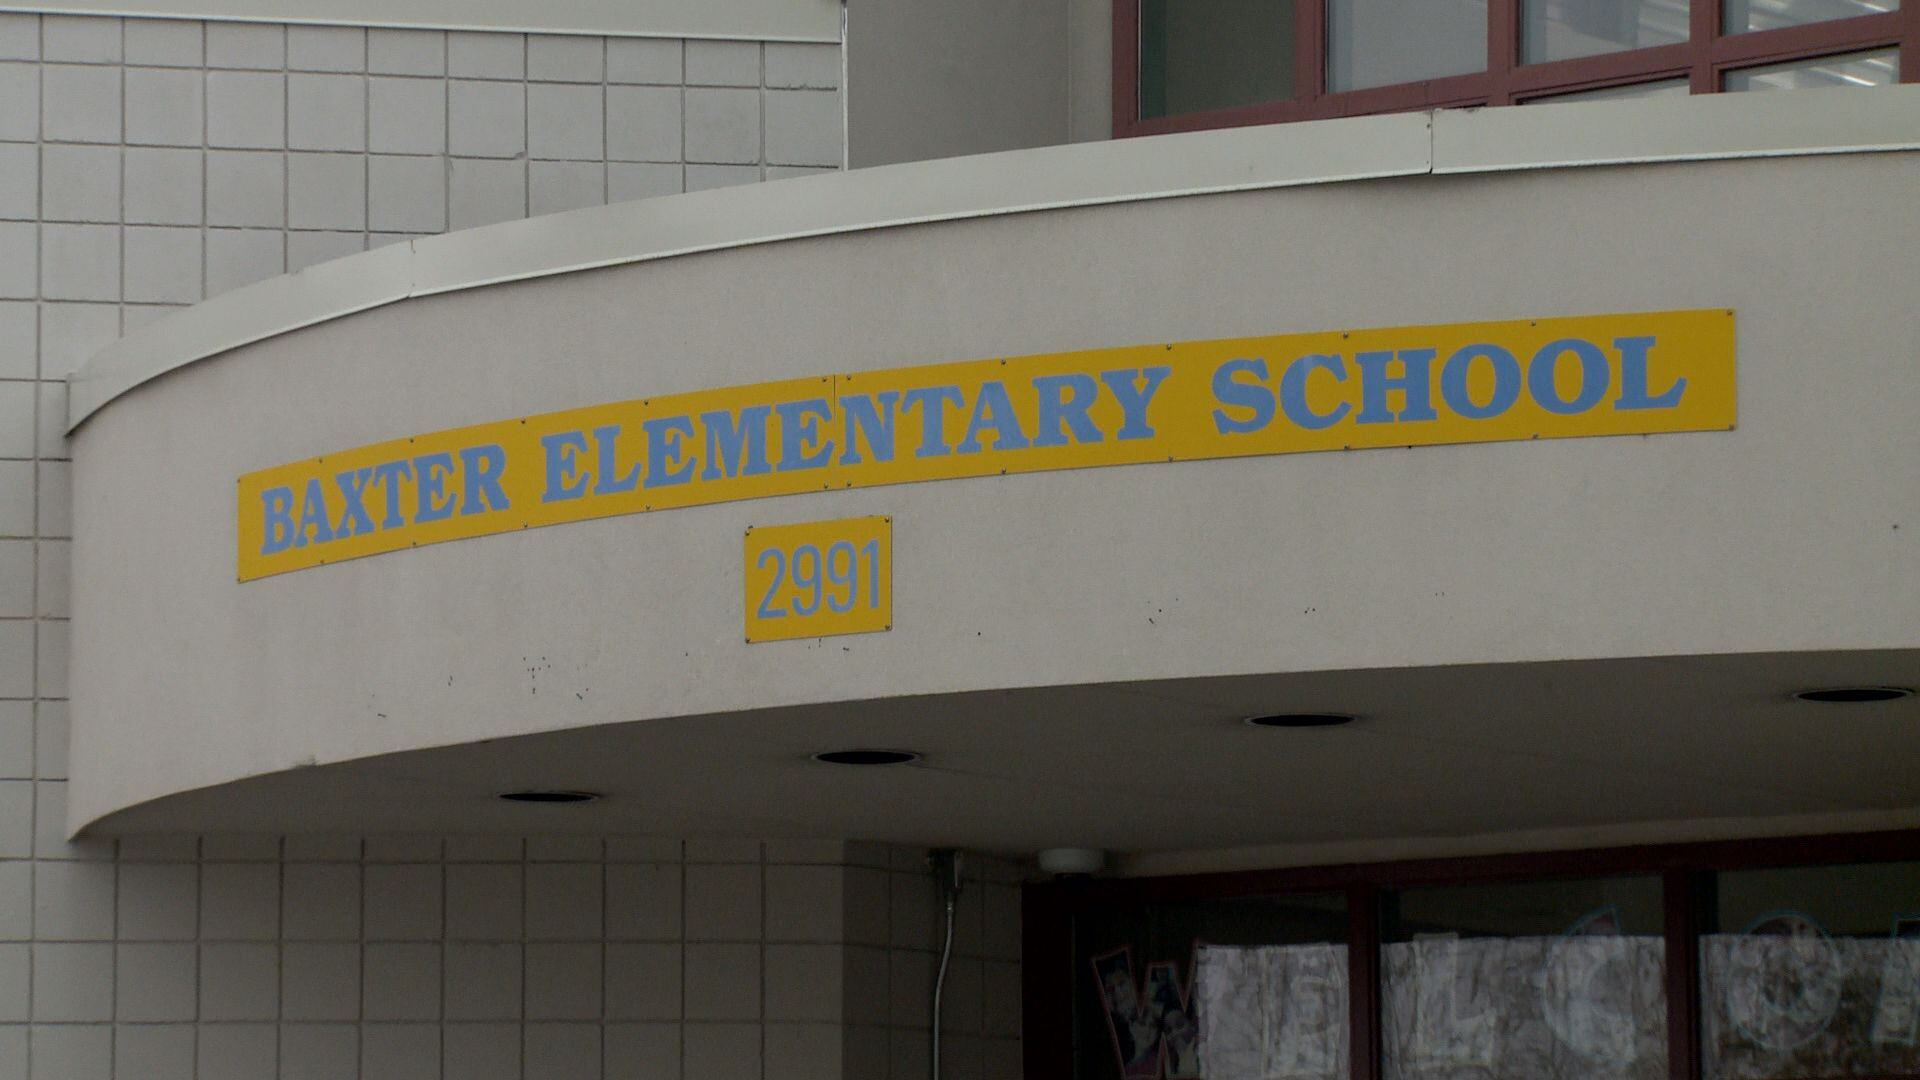 A former staff member at Baxter Elementary is accused of assaulting a student.